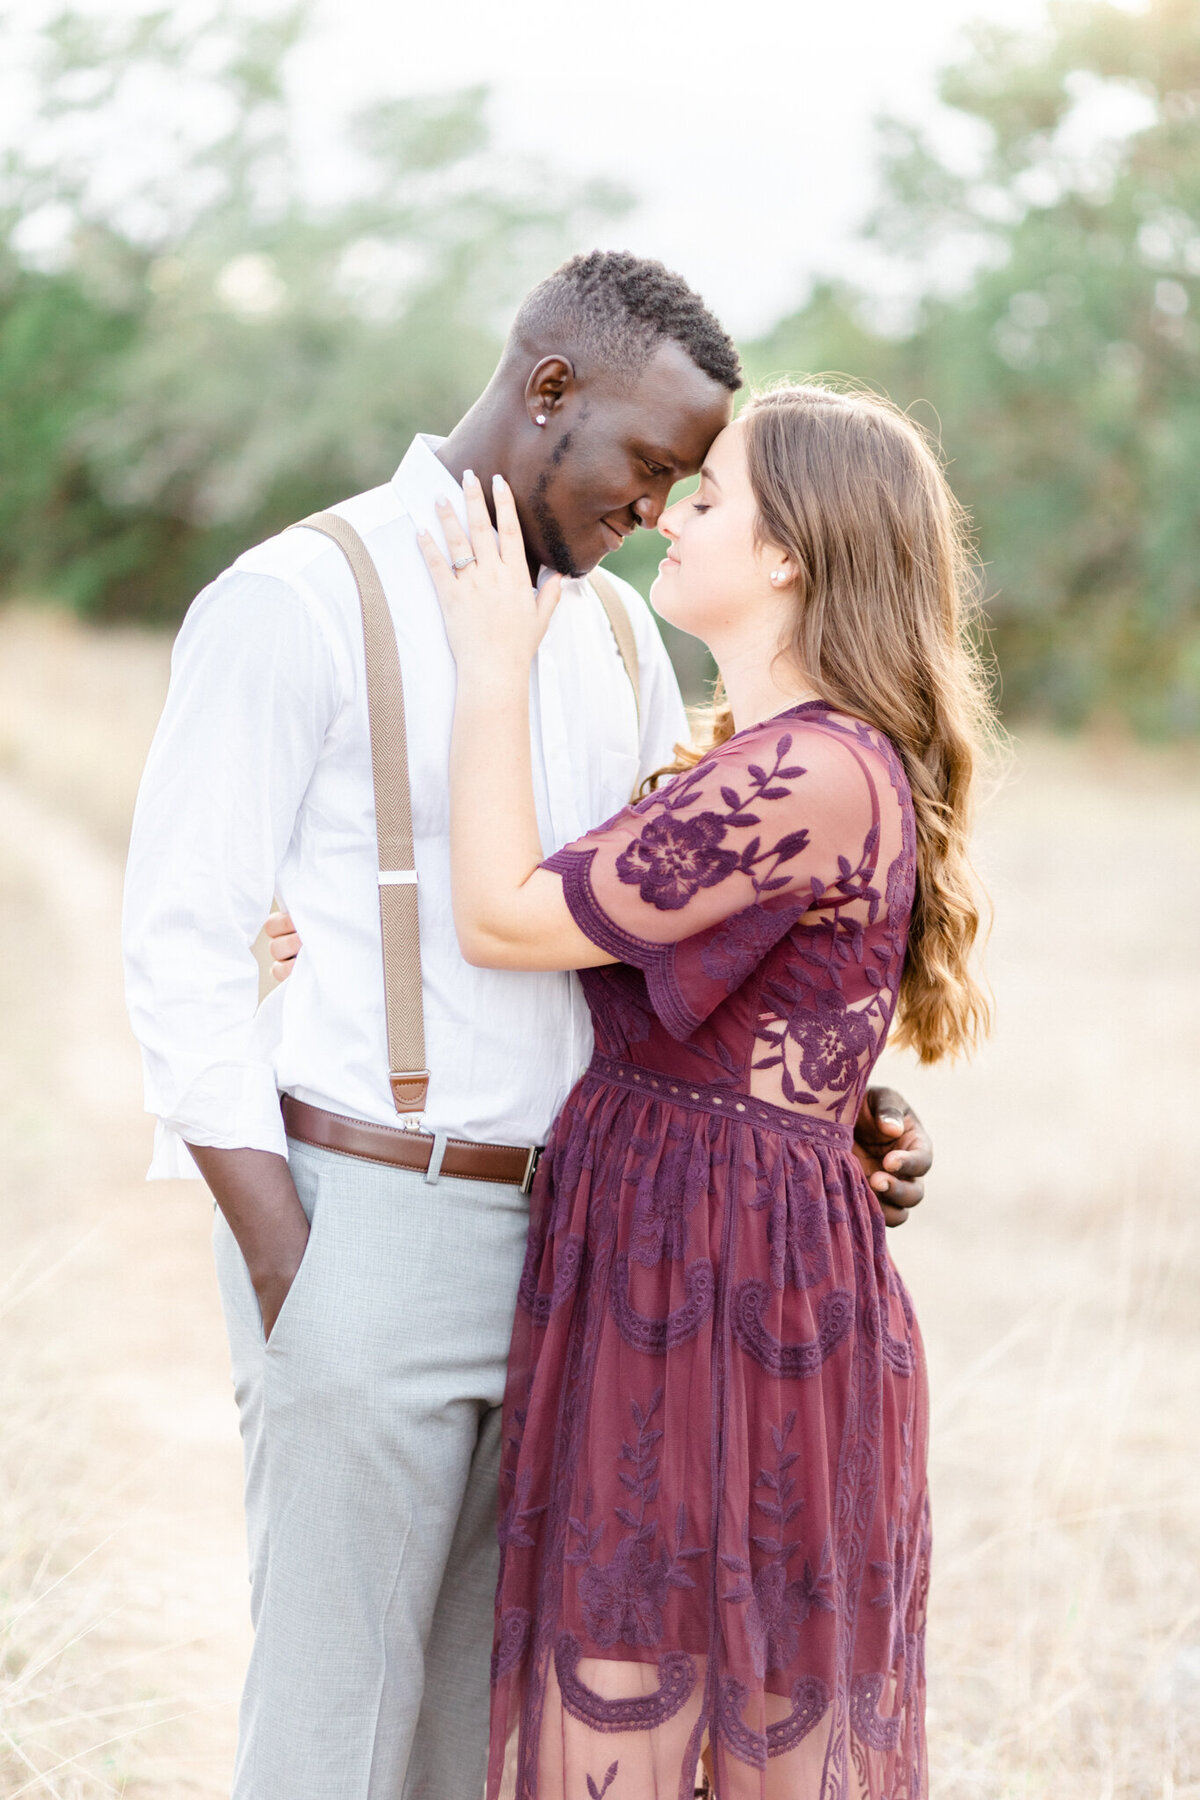 Jessica Chole Photography San Antonio Texas California Wedding Portrait Engagement Maternity Family Lifestyle Photographer Souther Cali TX CA Light Airy Bright Colorful Photography10